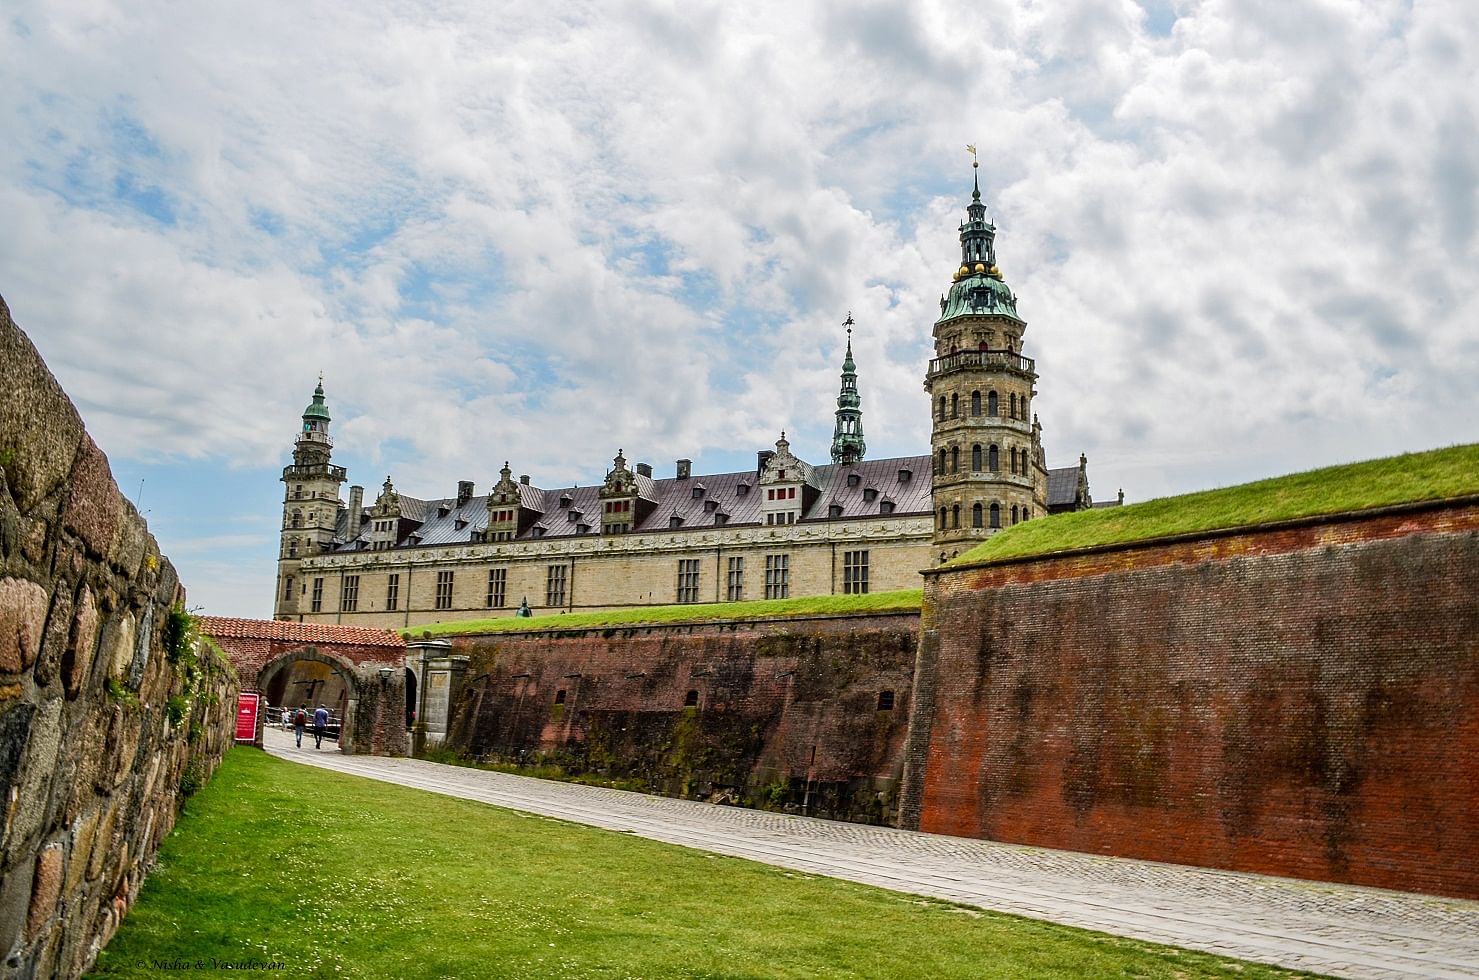 An outside view of Kronborg Castle.